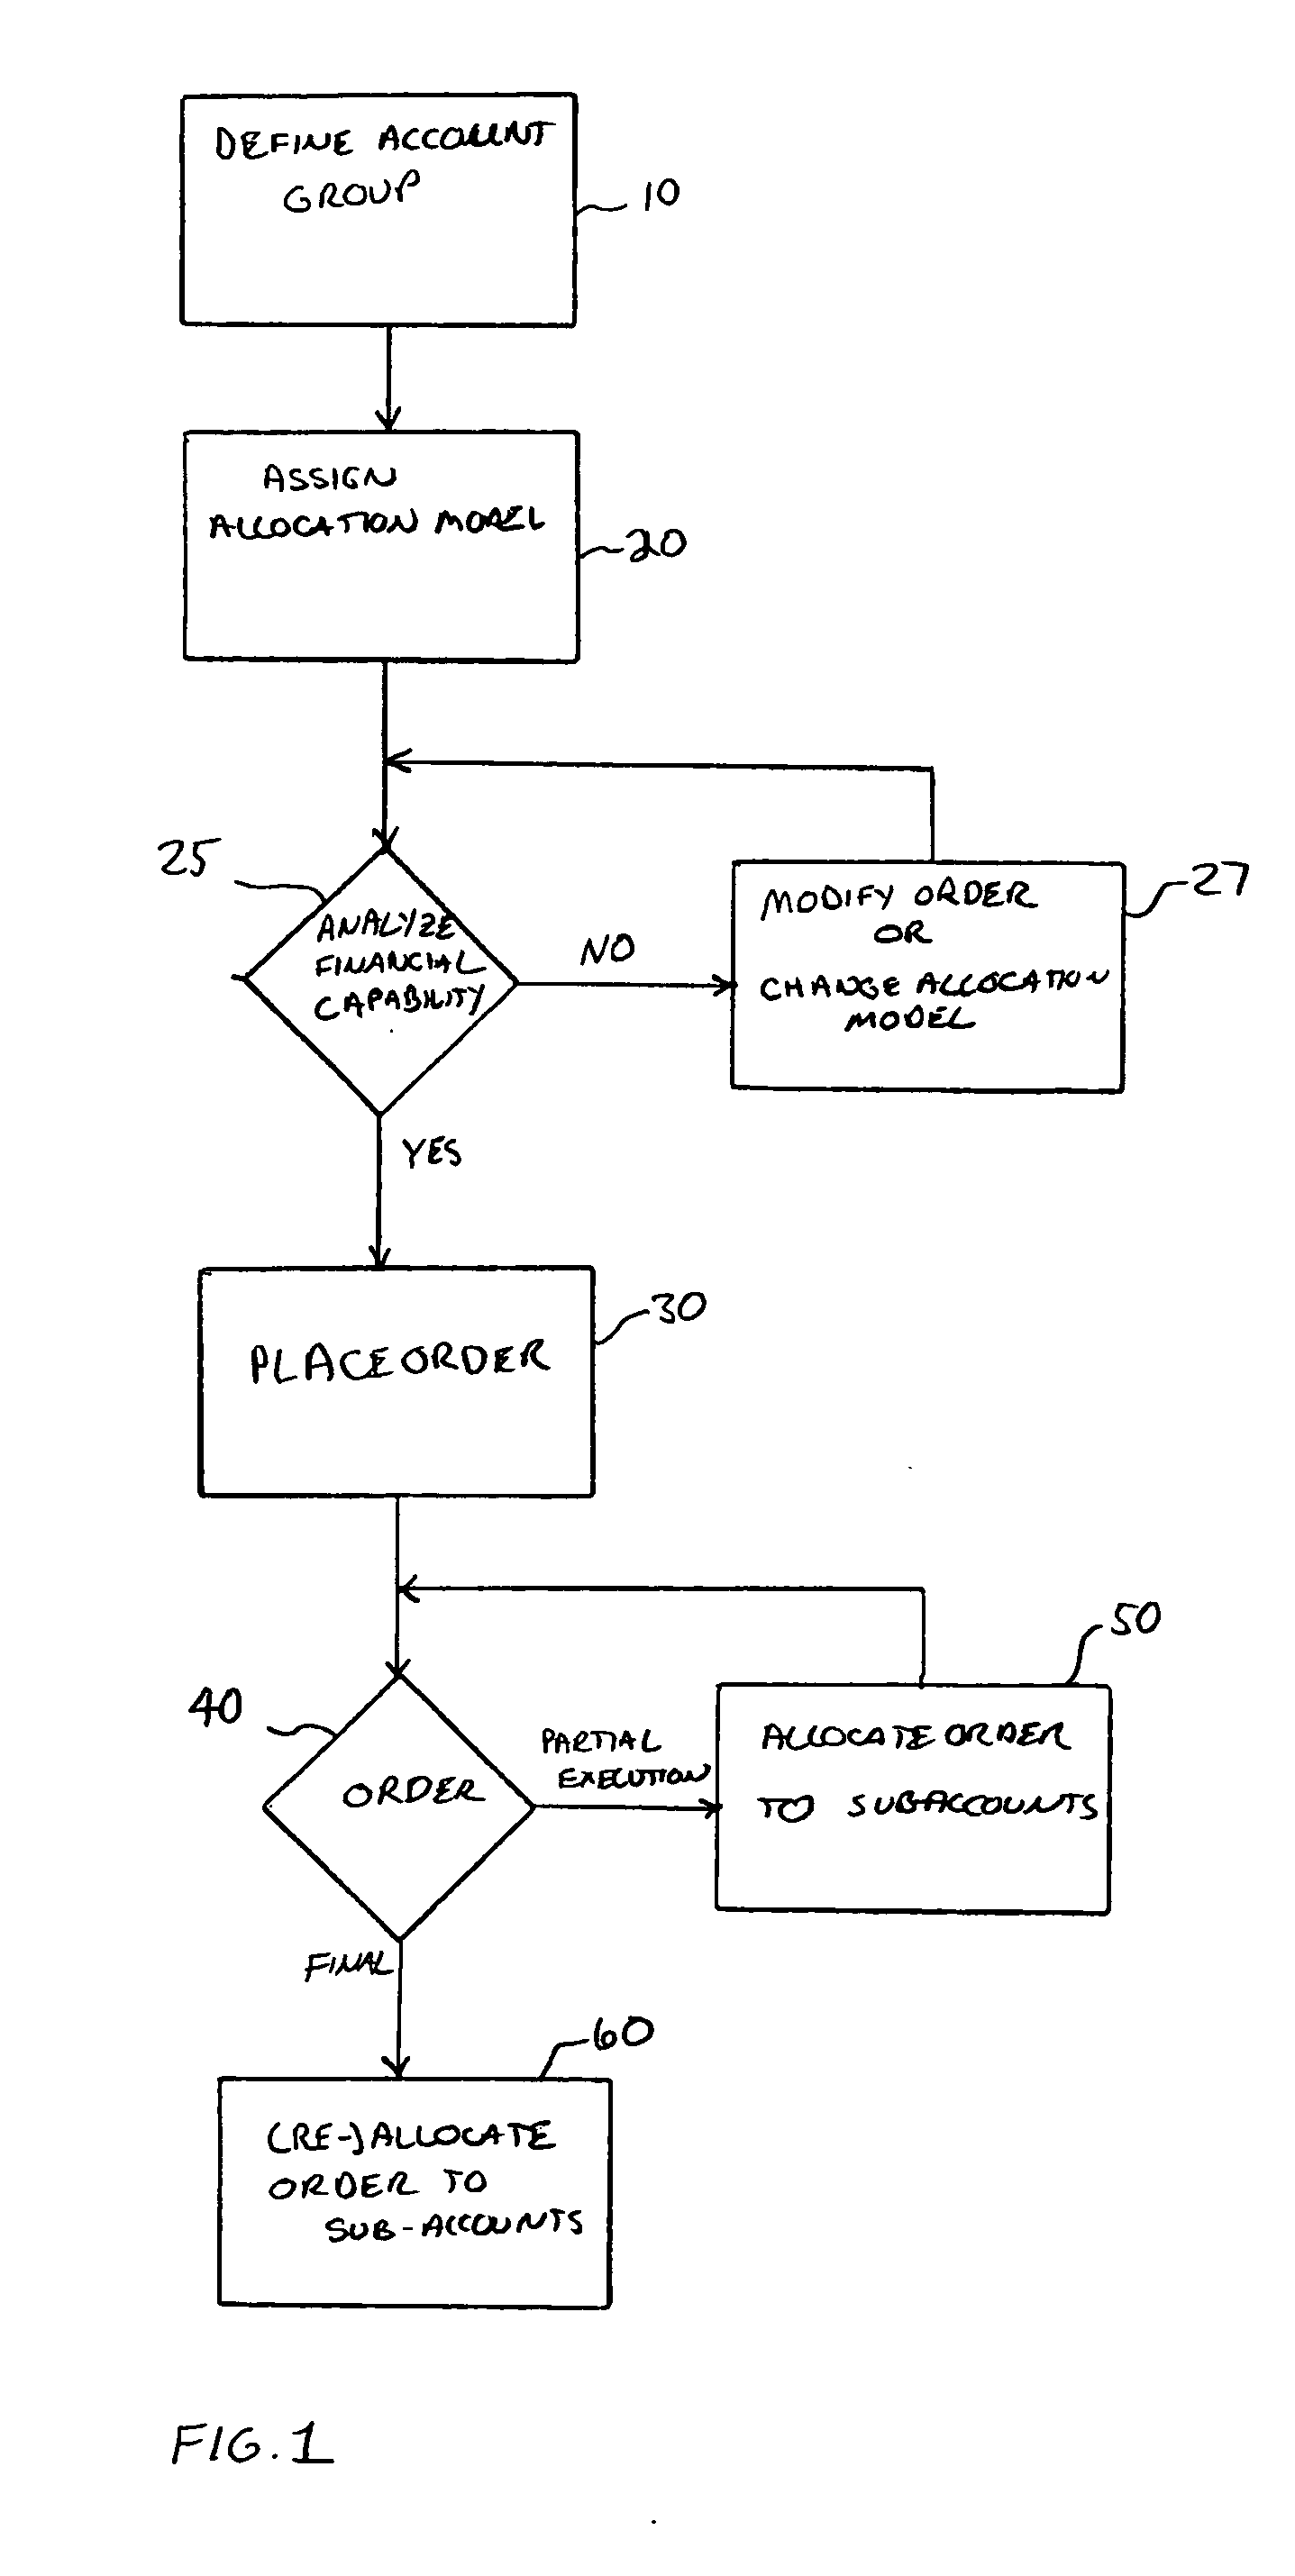 System and method for trading financial instruments using multiple accounts